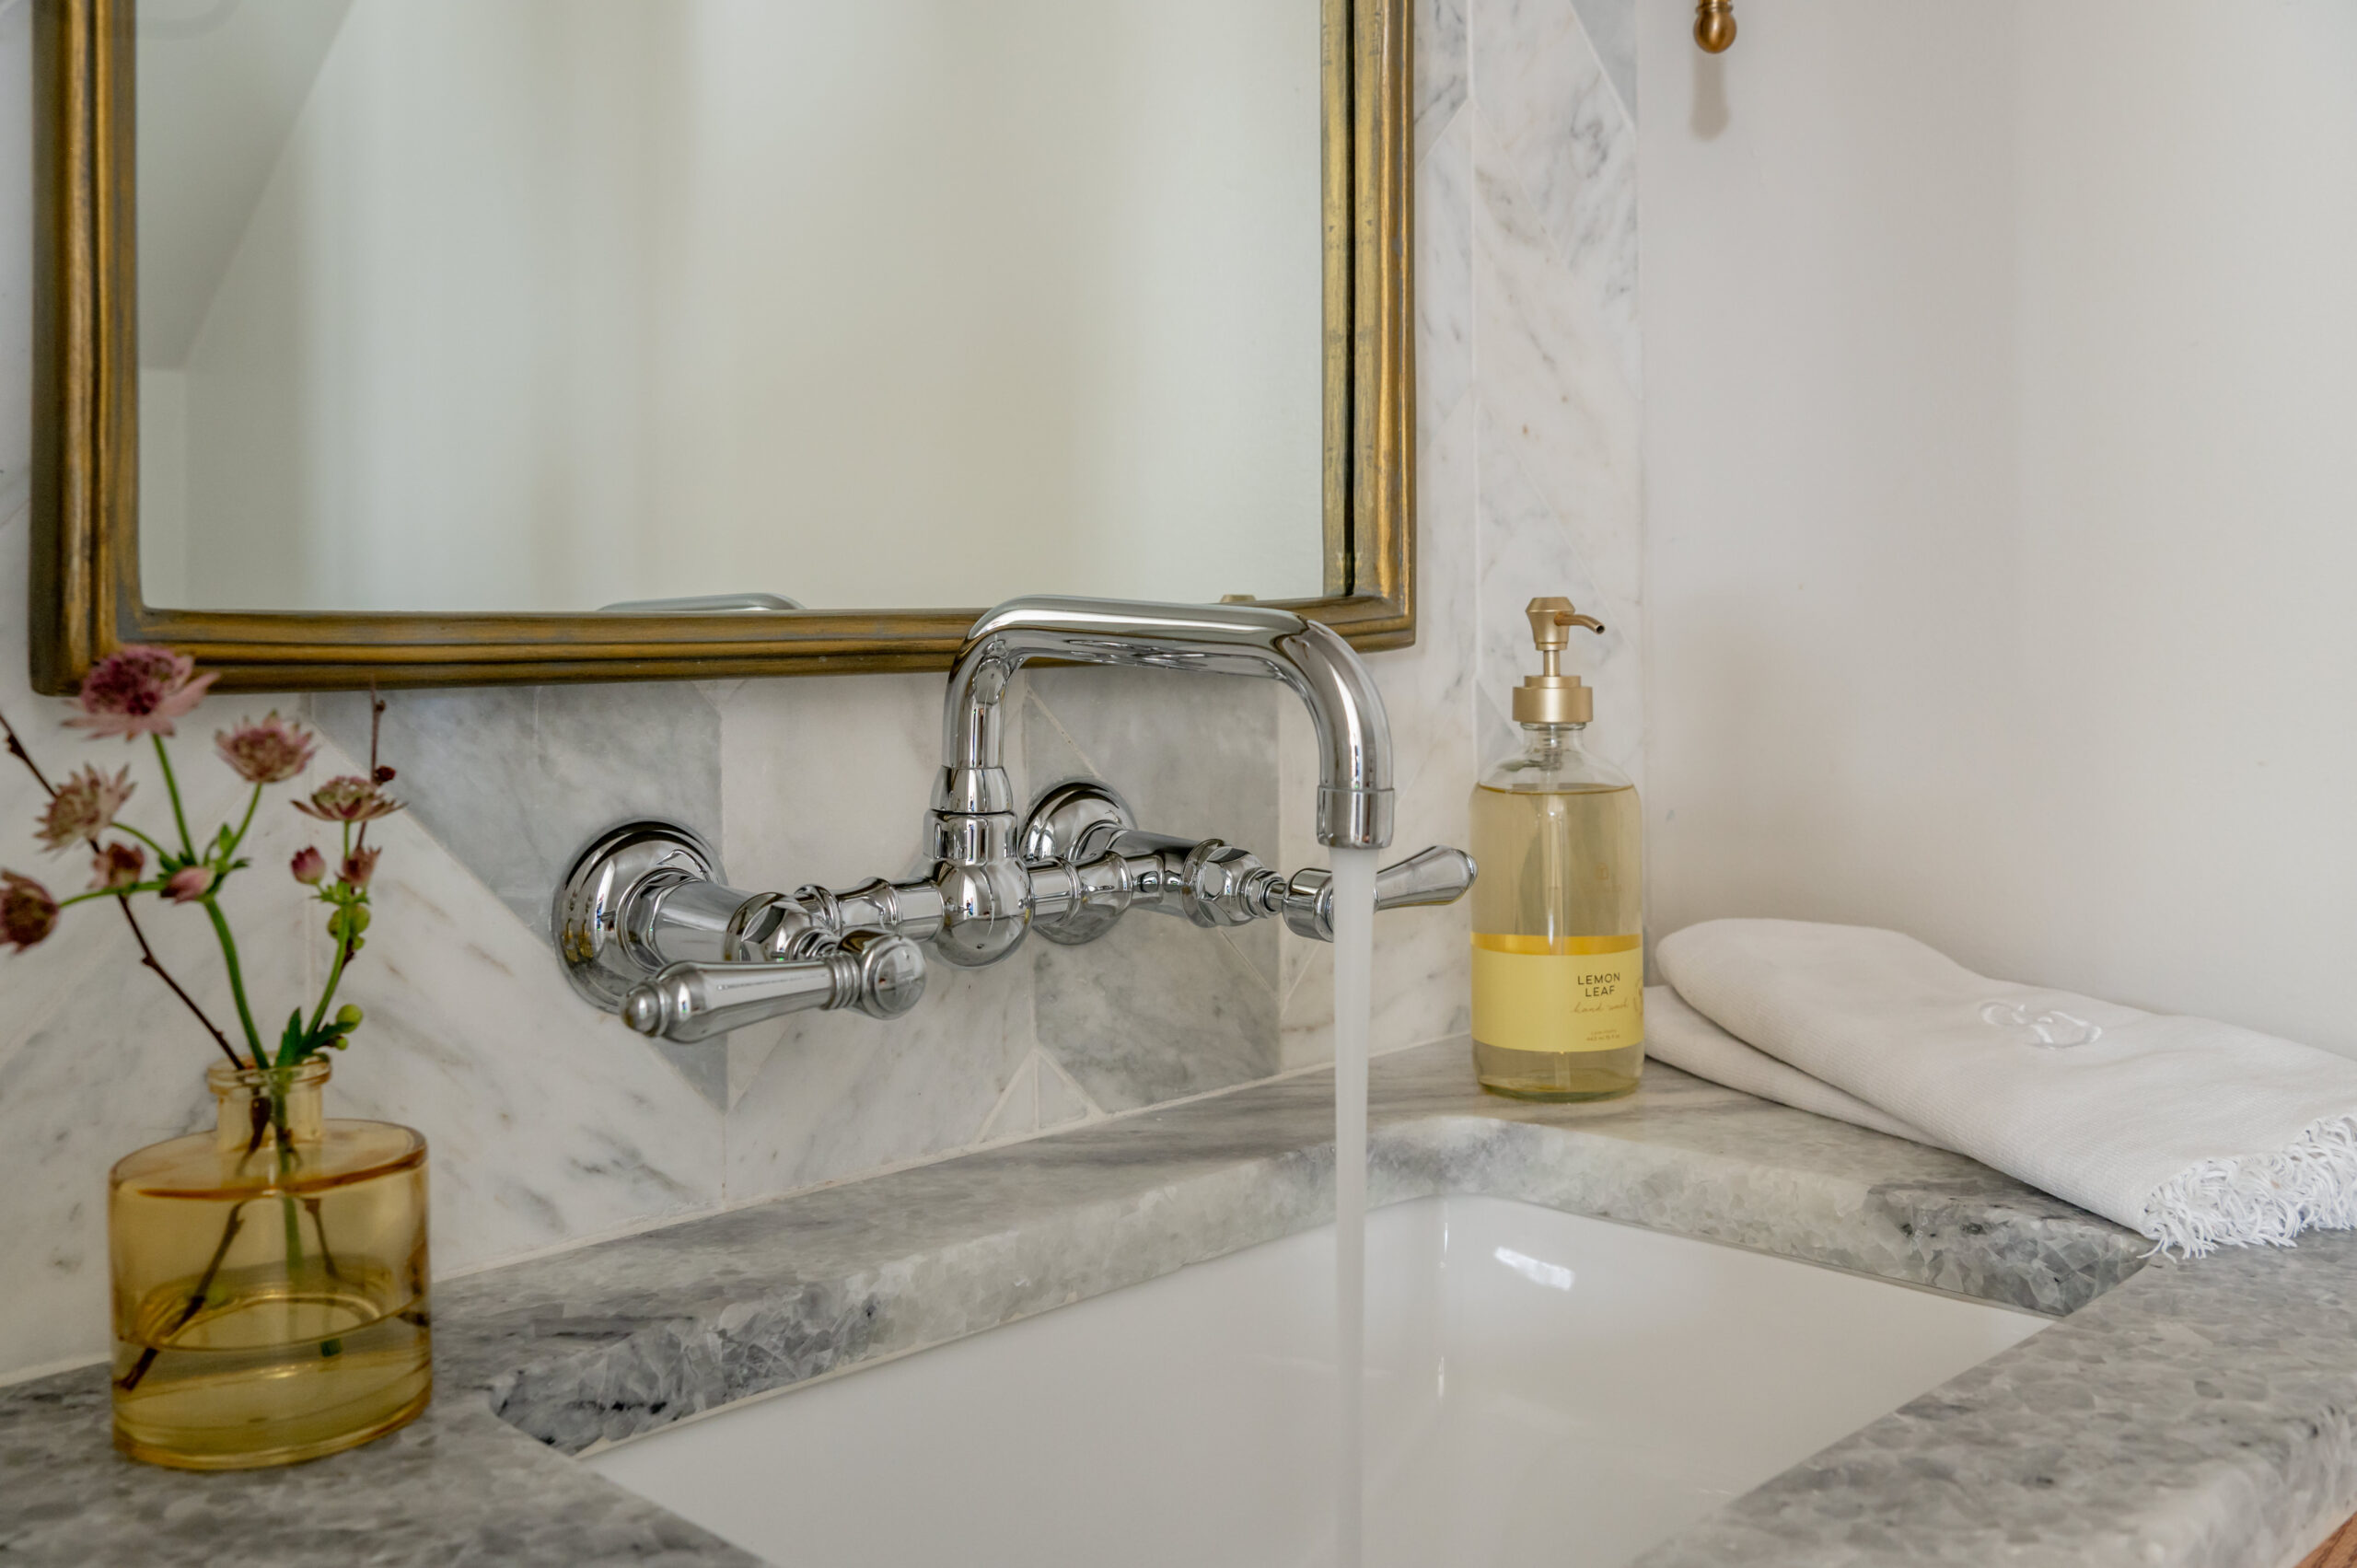 Marble bathroom sink with faucet running water